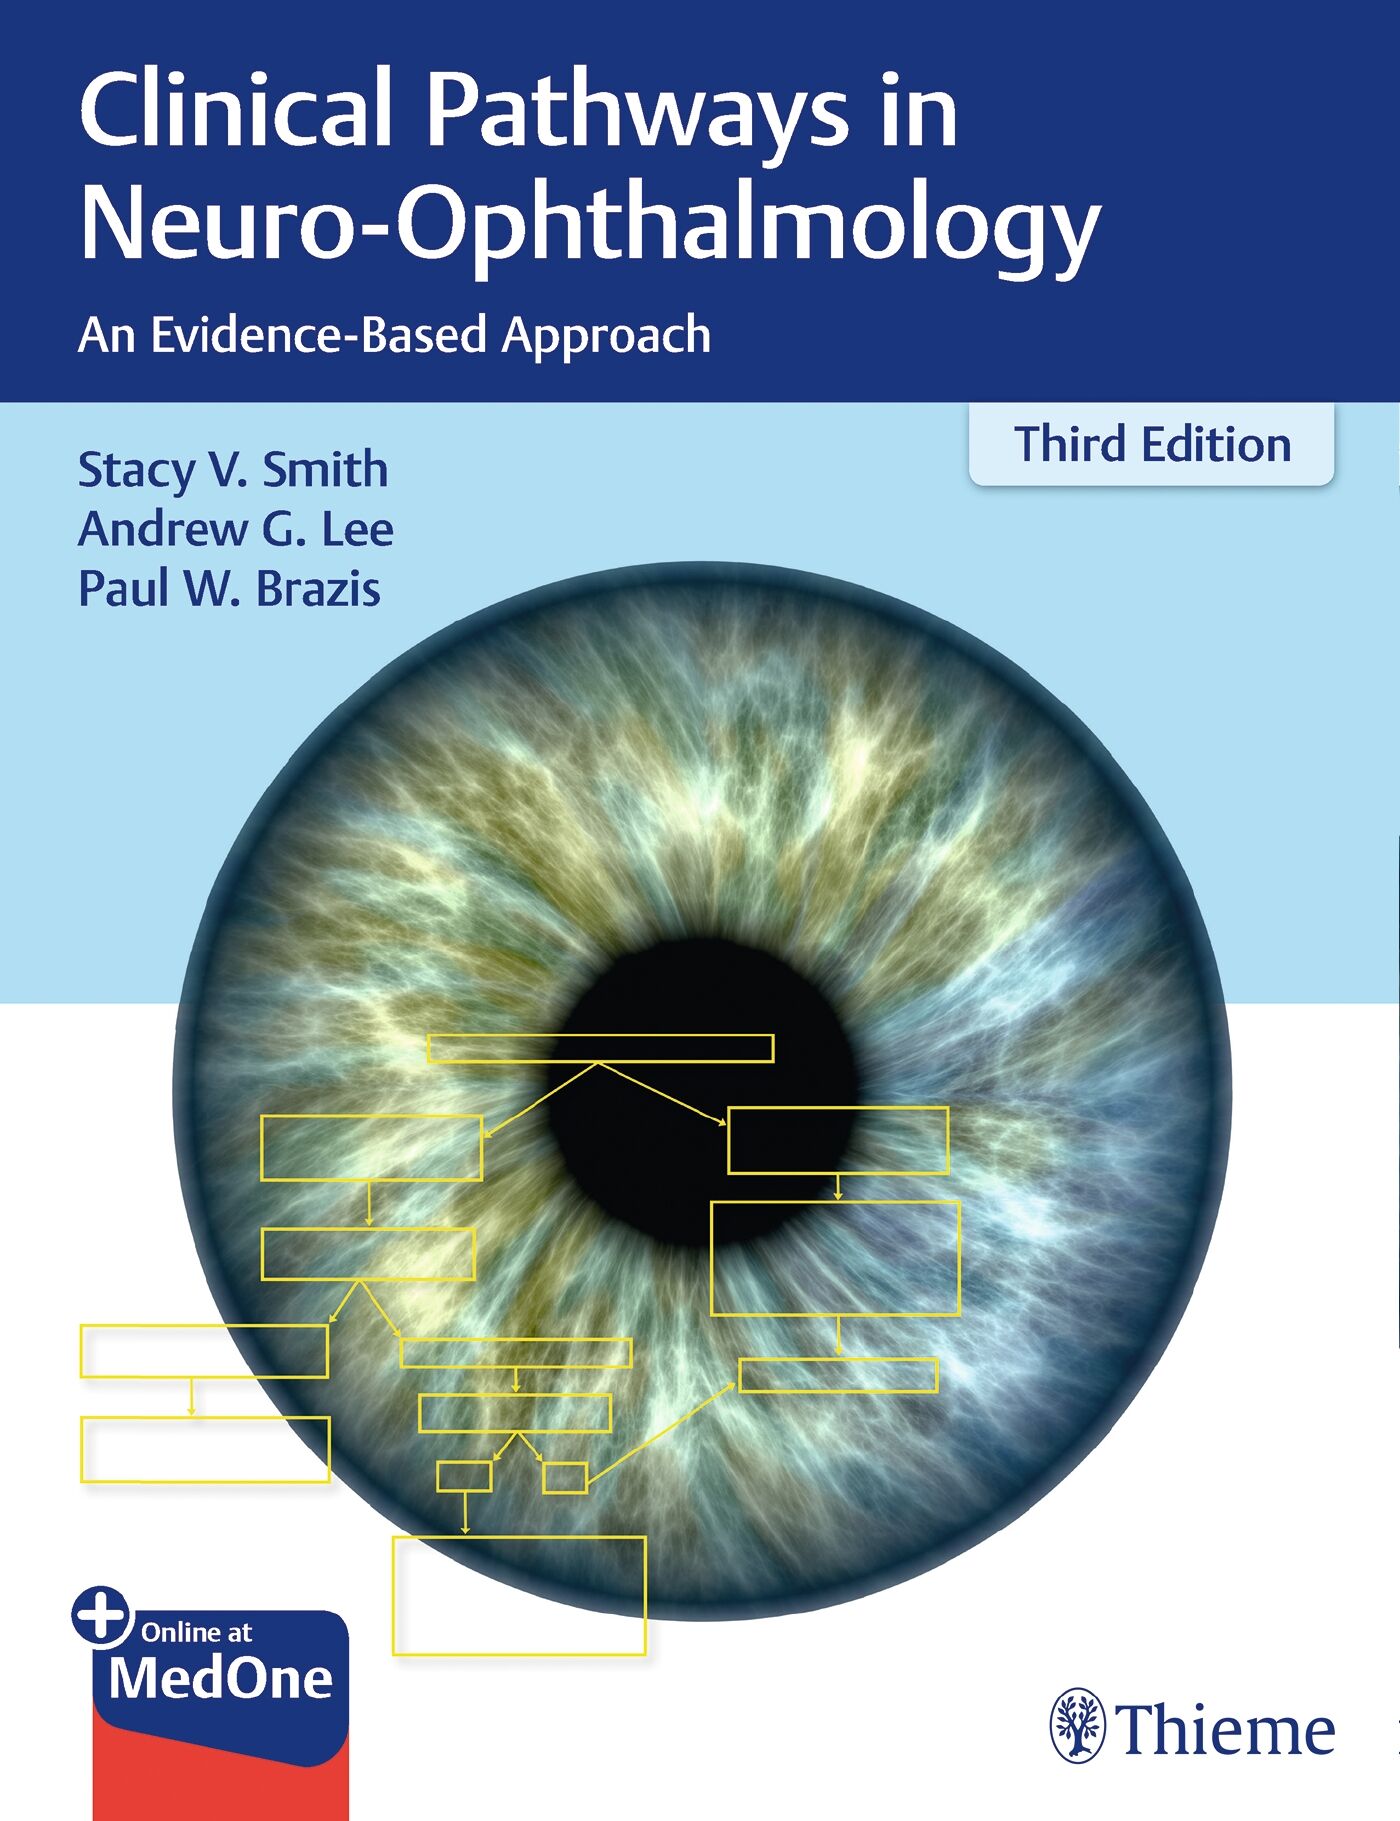 Clinical Pathways in Neuro-Ophthalmology, 9781626232853